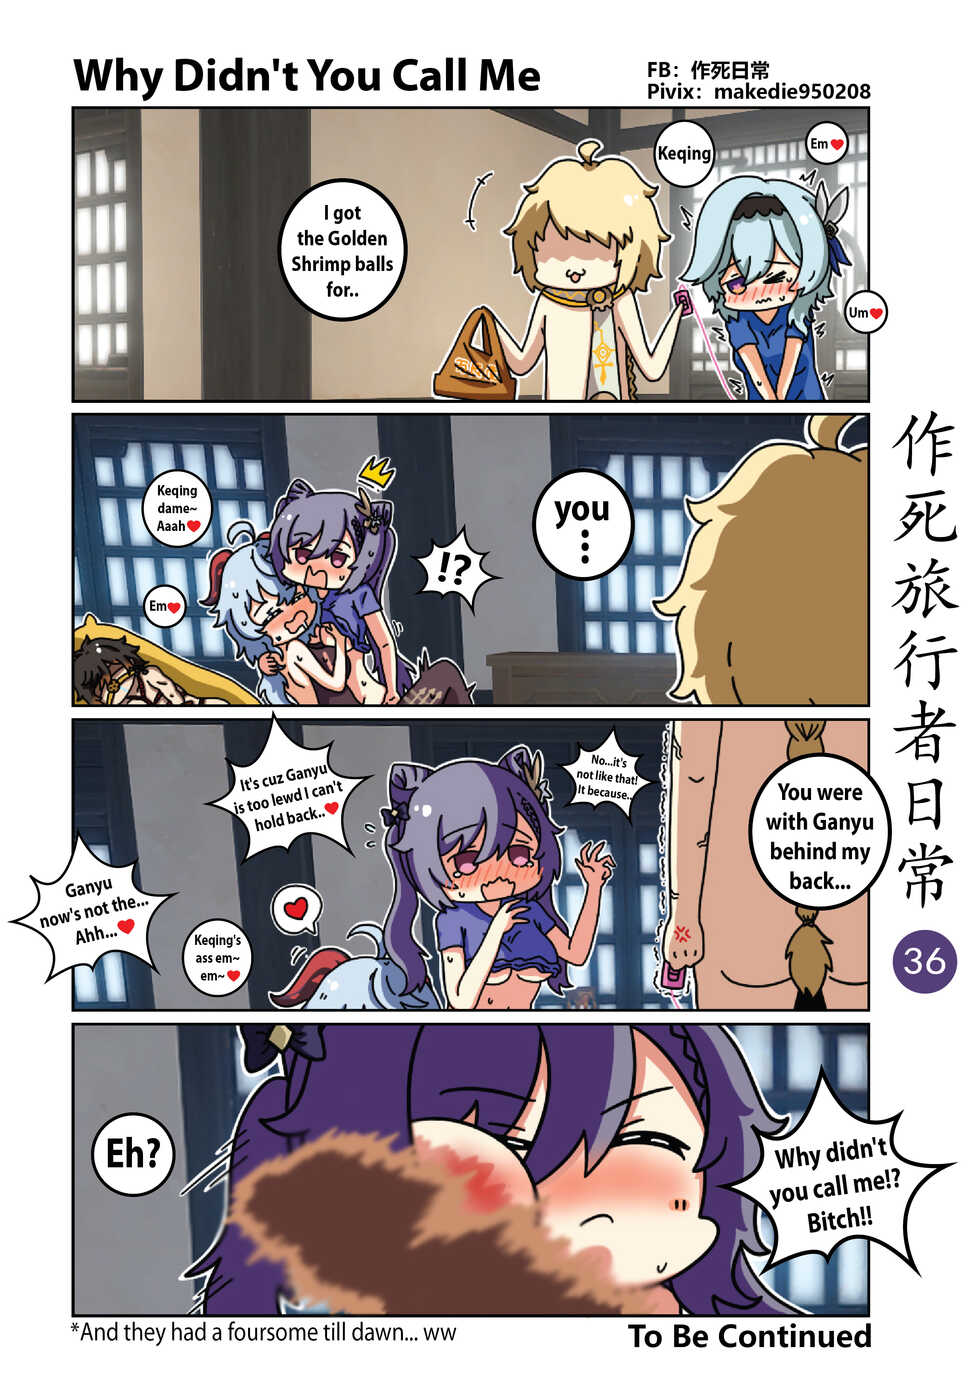 [makedie950208] Dead Traveler Daily [english] - Page 36